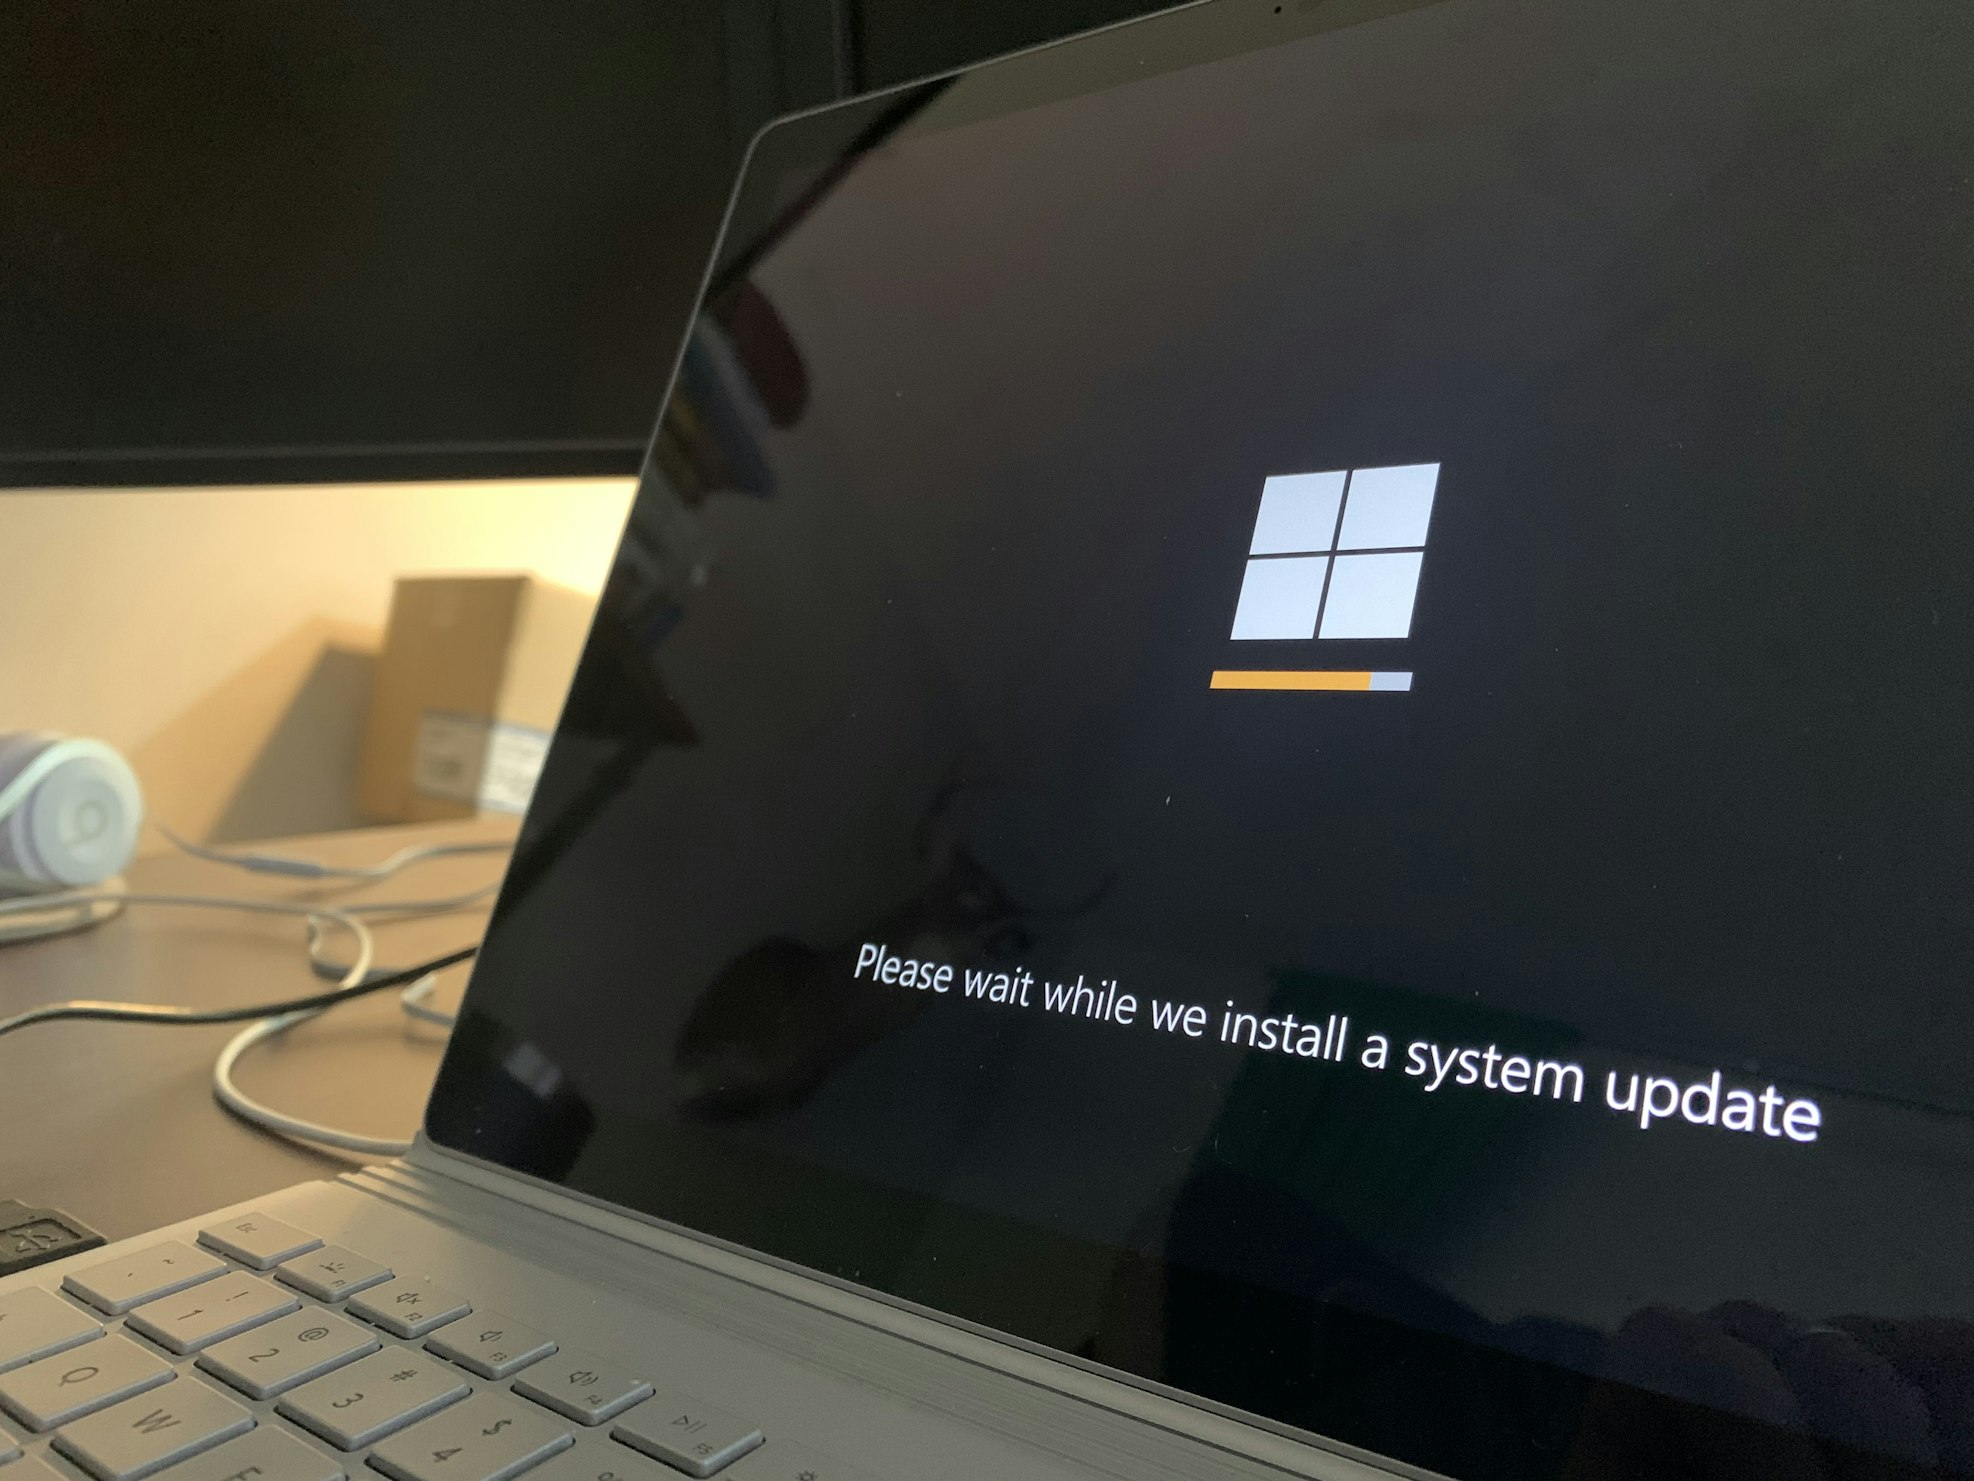 How To Fix Windows Update Stuck at 100%